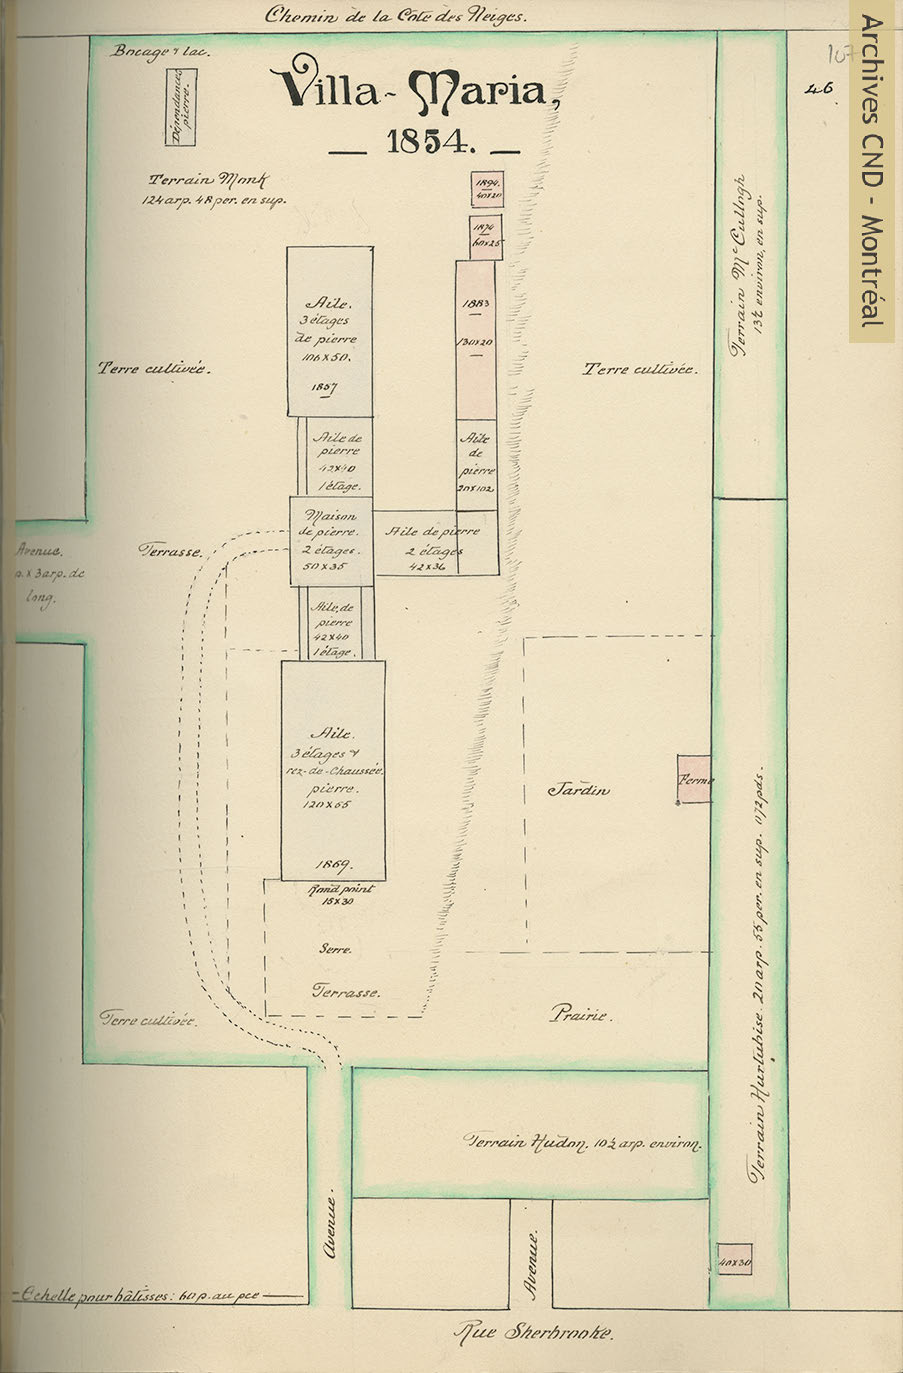 Plot plan of the Sisters of the Congregation